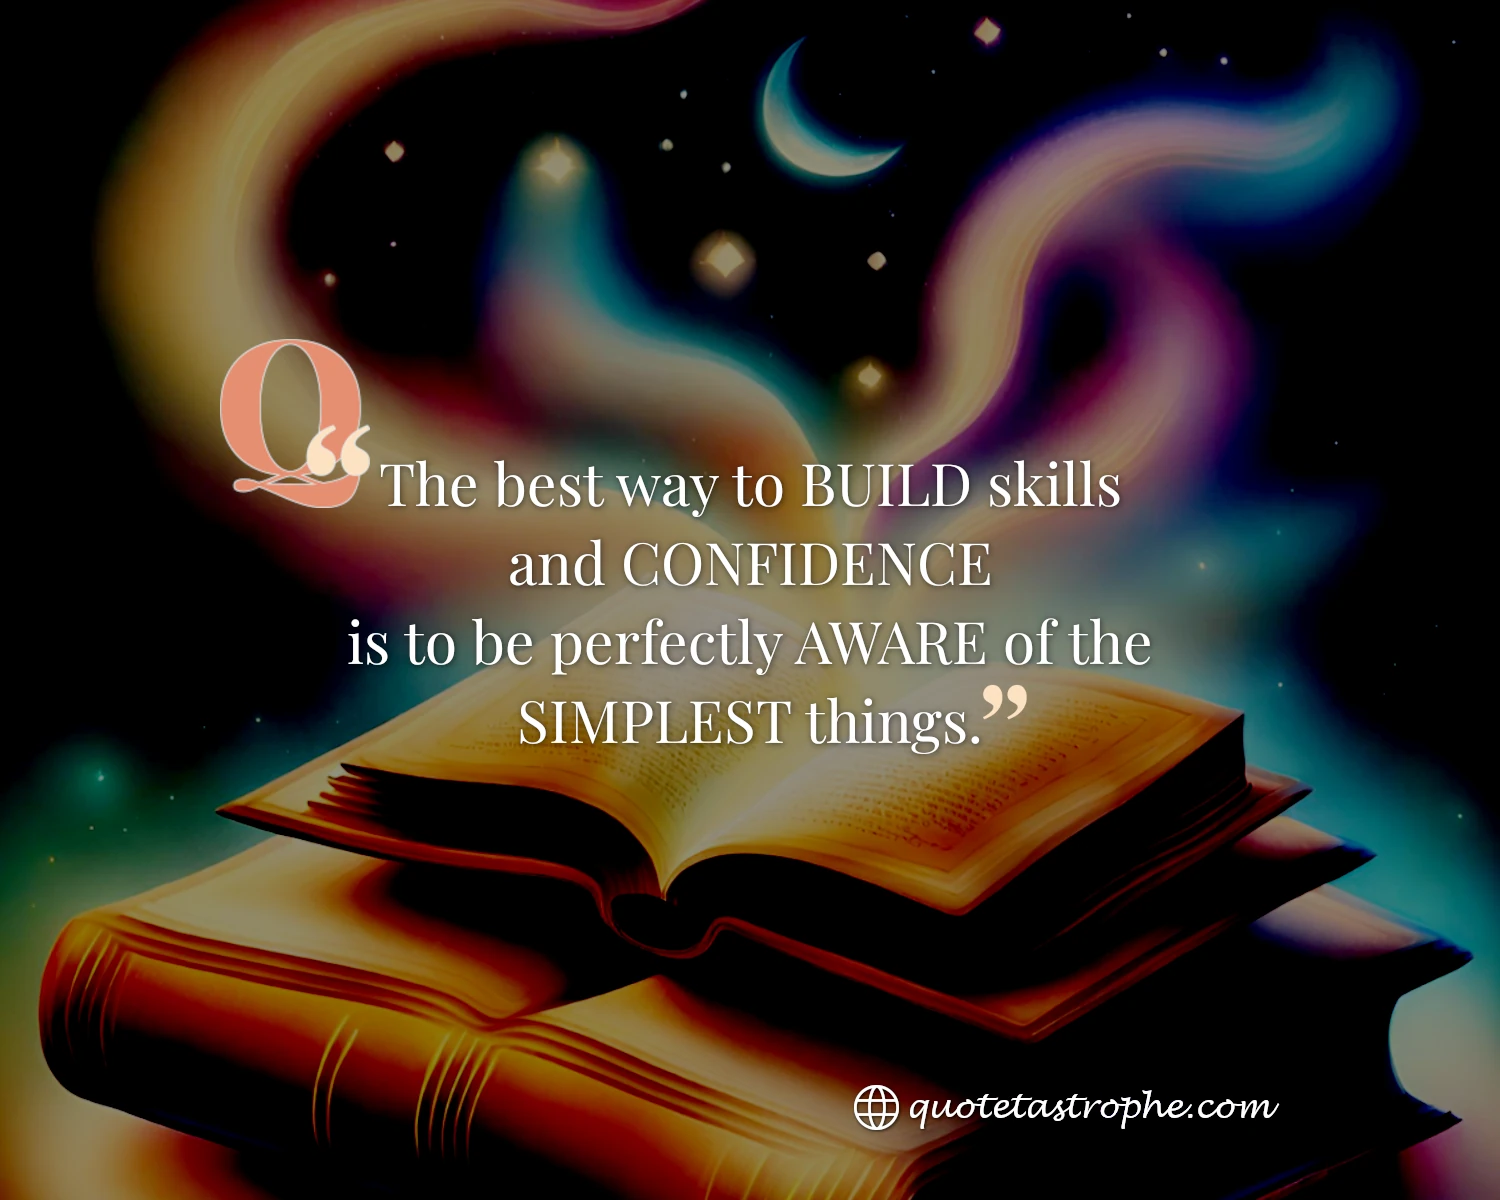 The Best Way to Build Skills is Knowing The Simplest Things